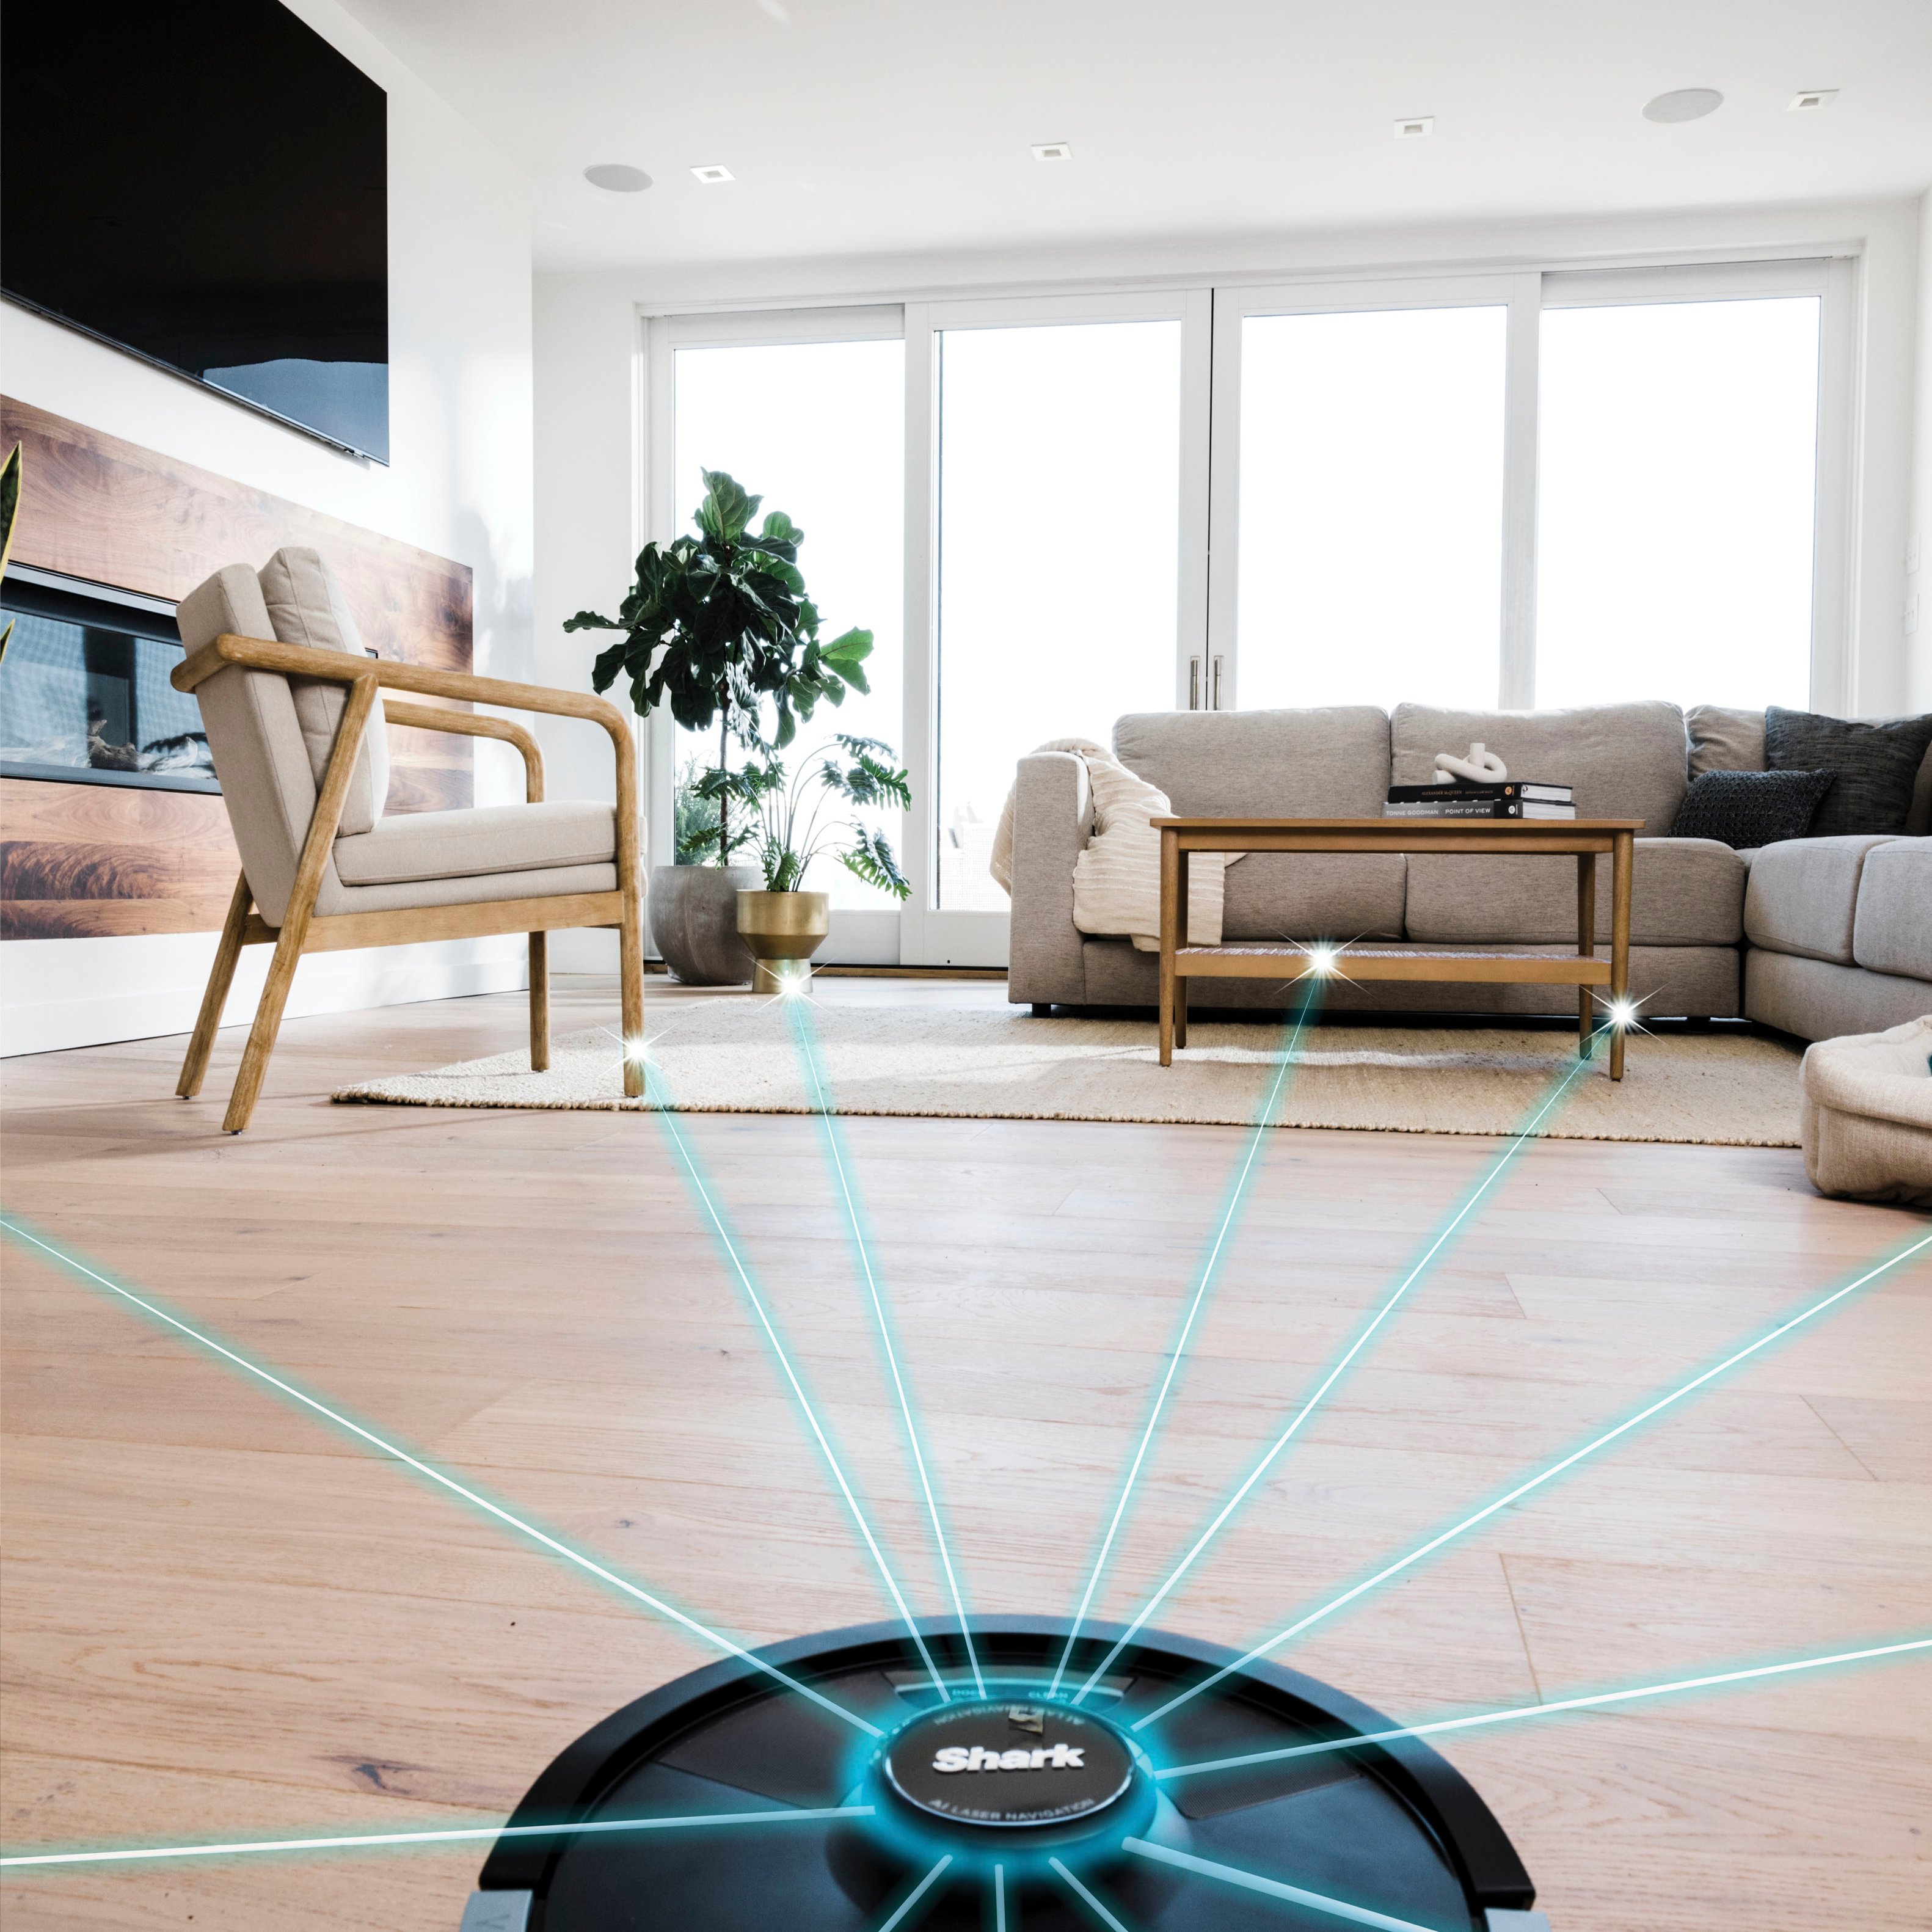 Shark AI Ultra 2-in-1 Robot WiFi Buy Home Vacuum Clean, Sonic Mopping, - Best & RV2620WD Black Connected Mapping, with Matrix Mop